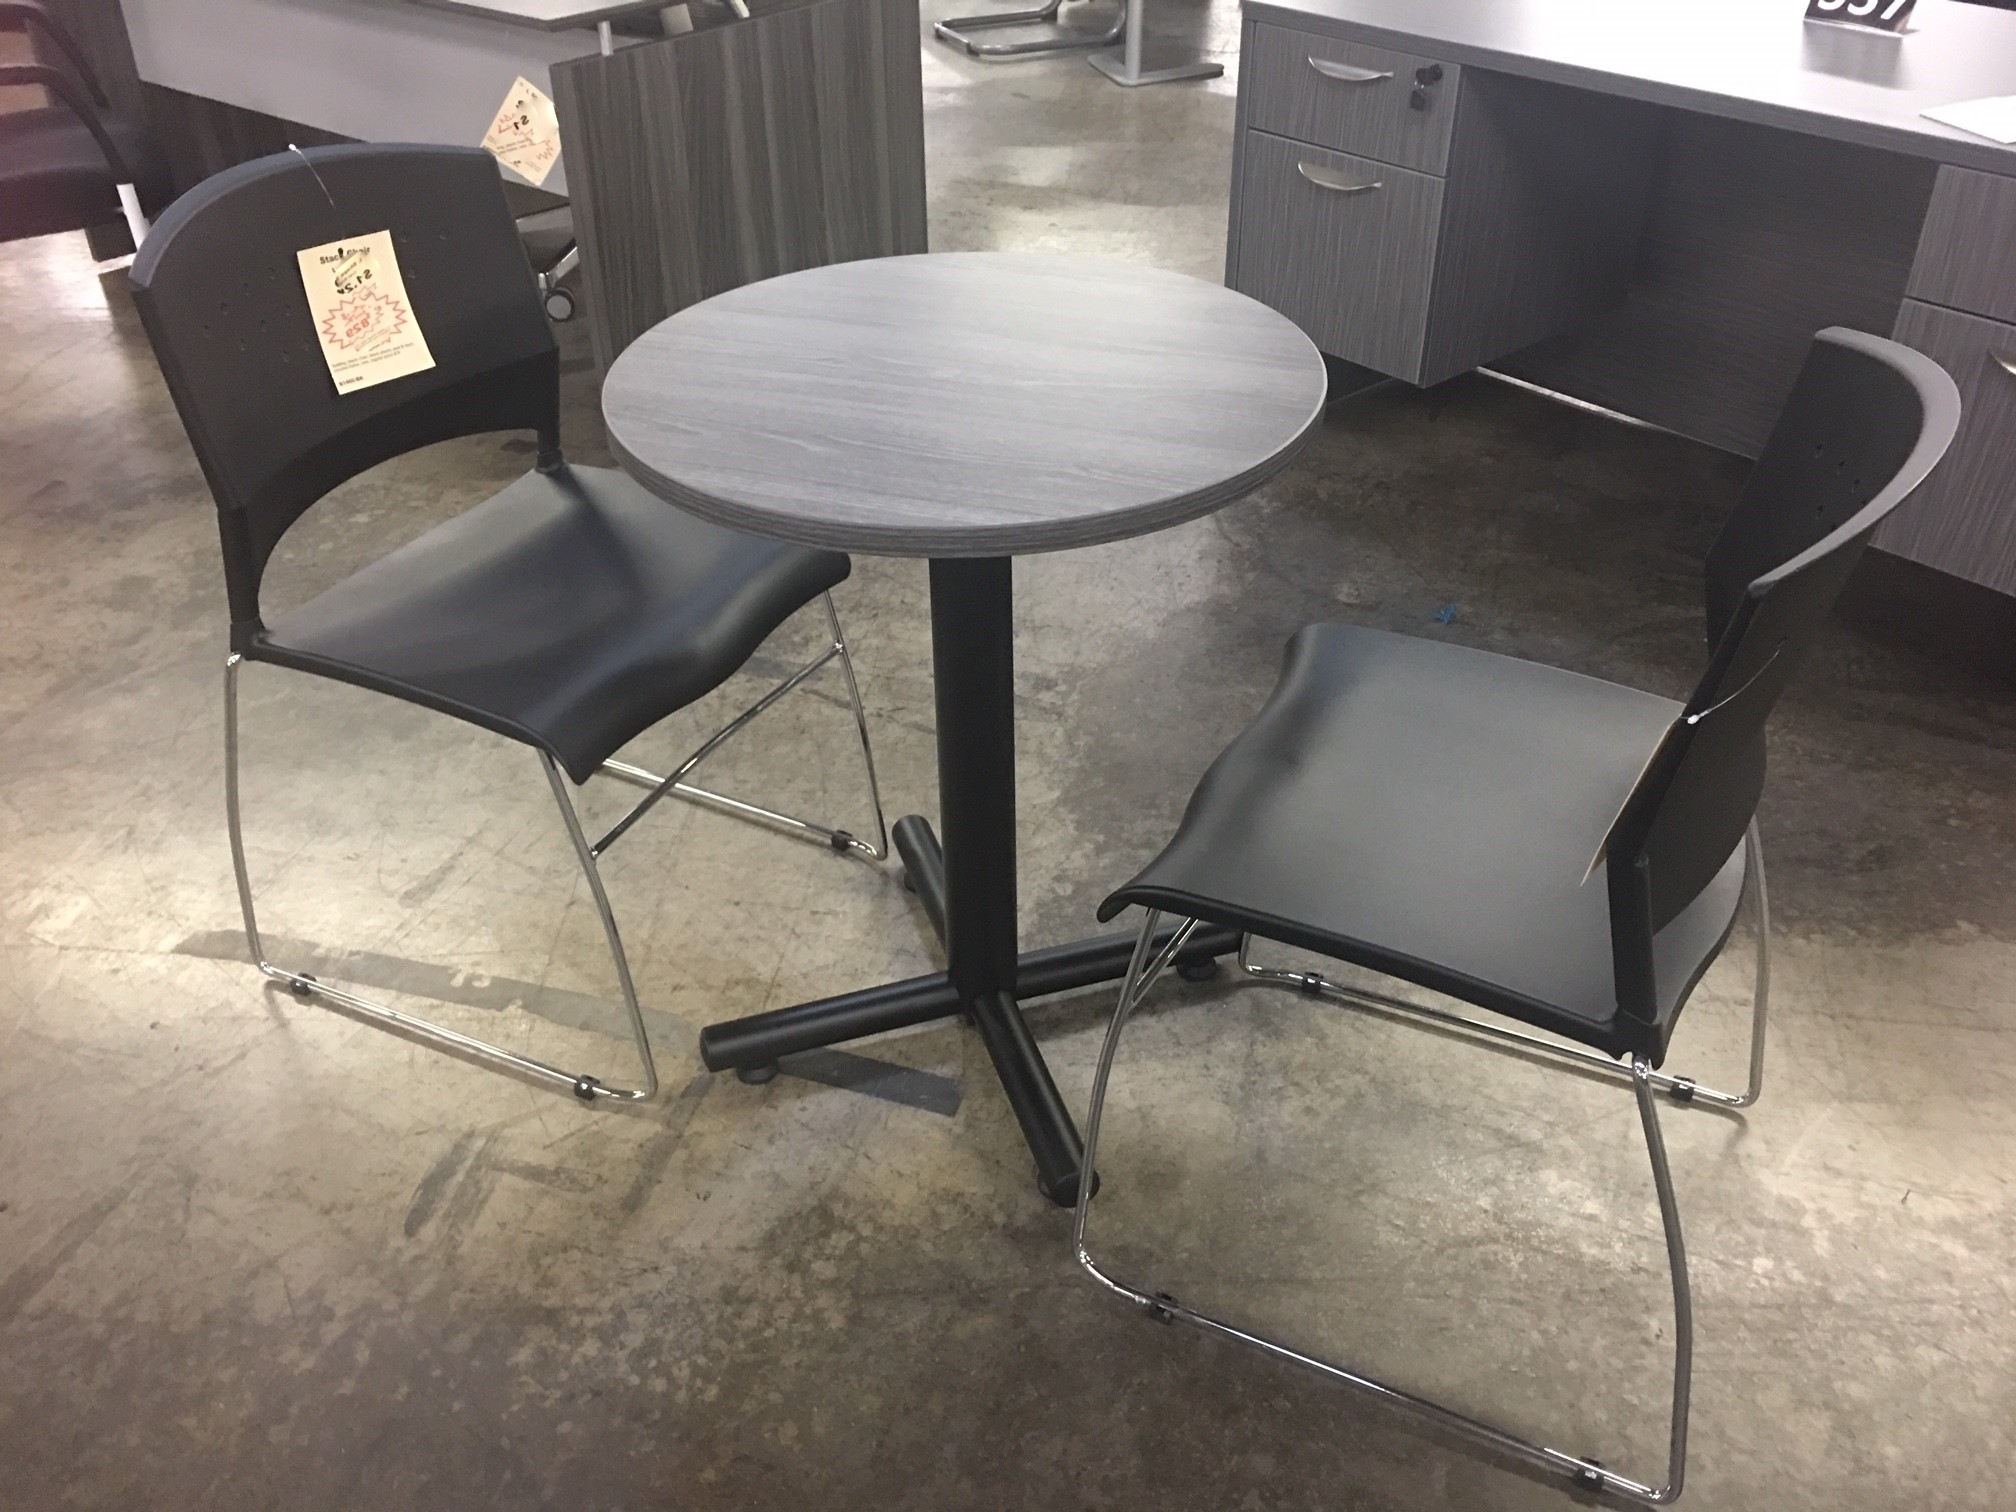 Simple break room chairs around a table